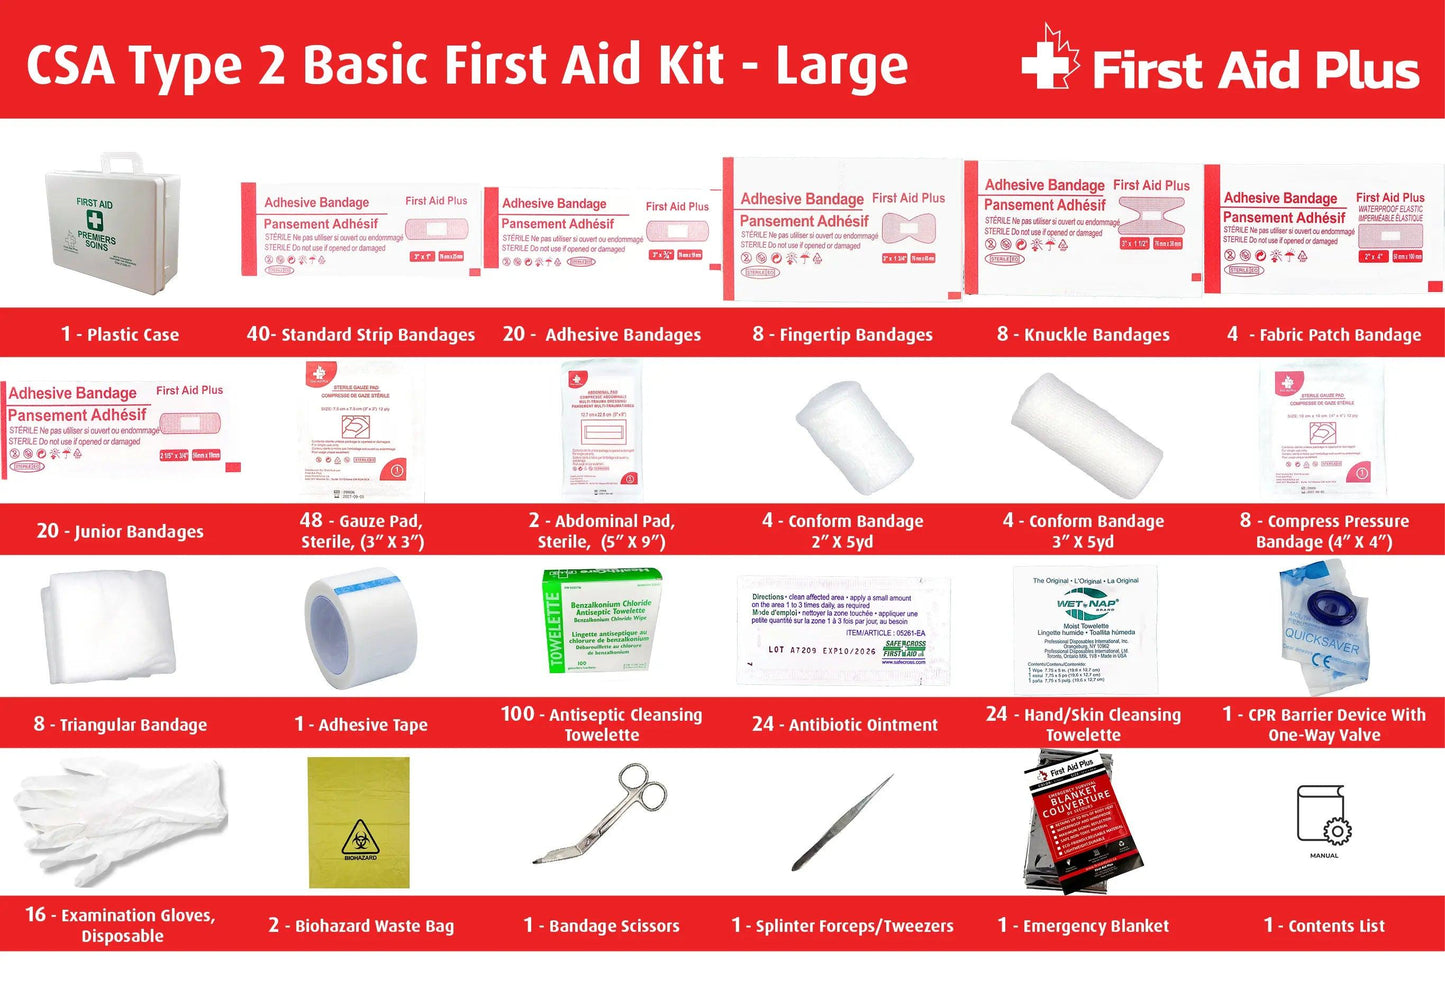 CSA First Aid Kit, Type 2 Basic - Large (51-100 Workers) - First Aid Plus